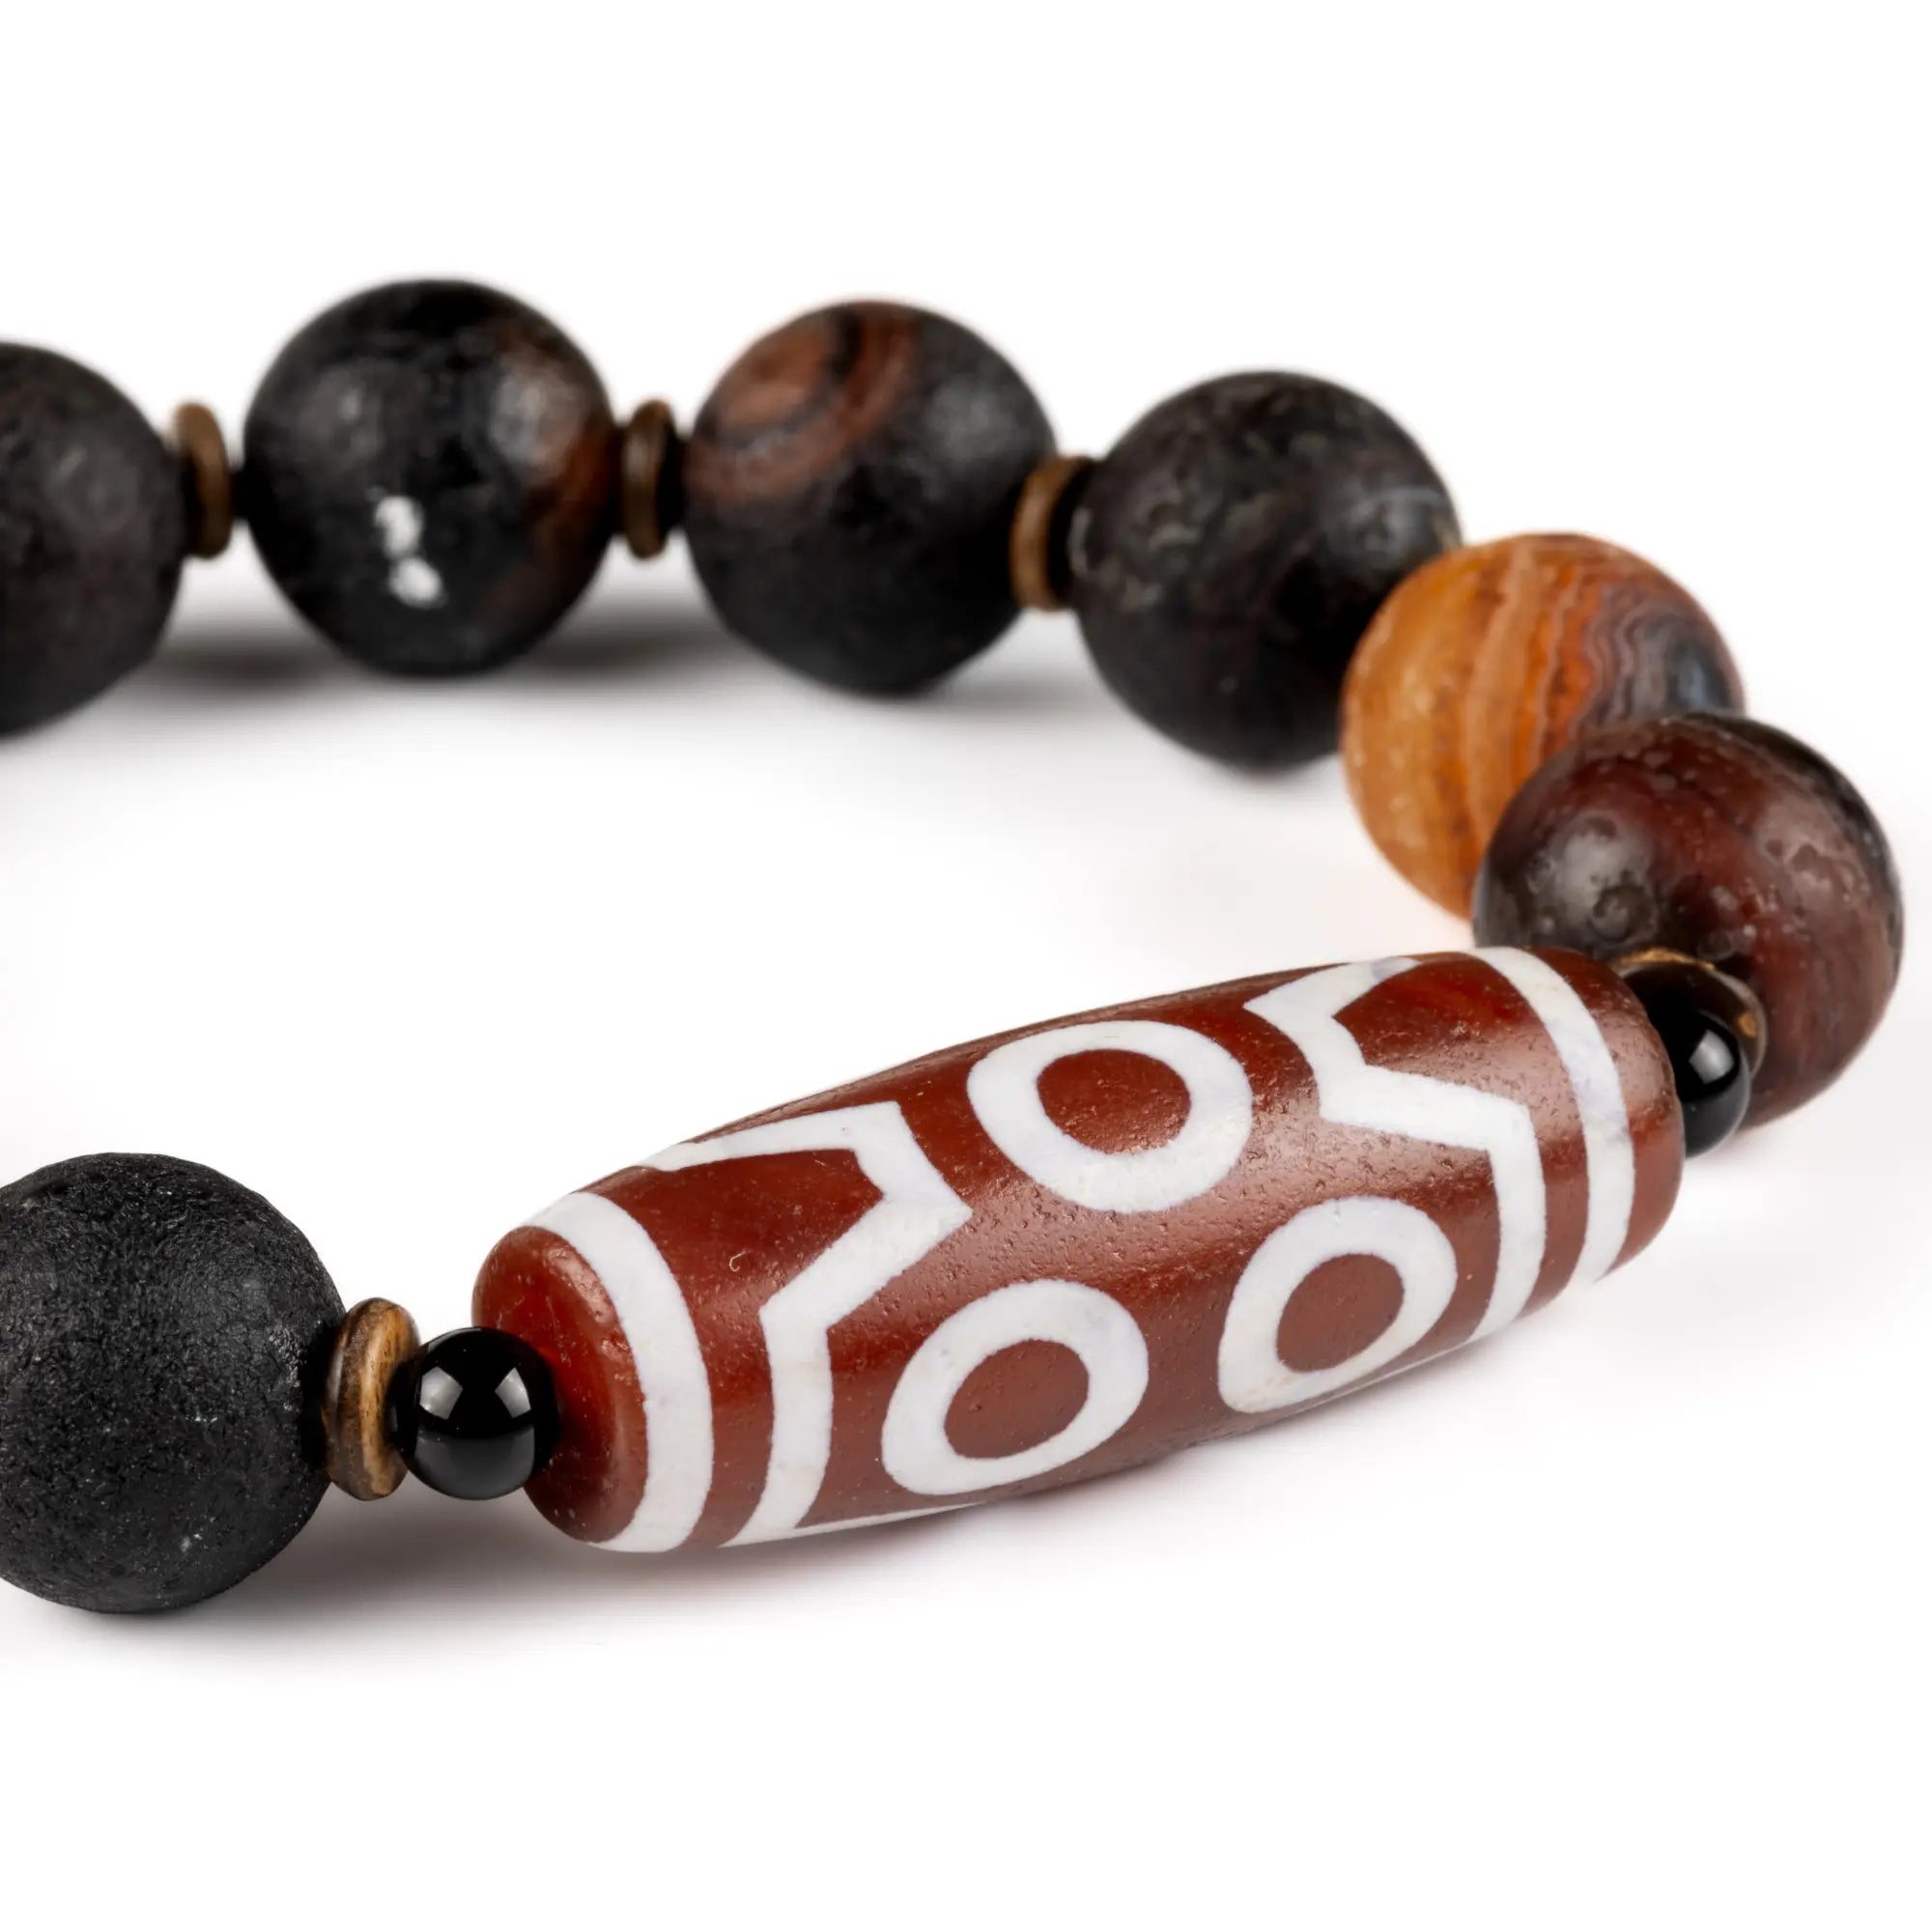 Tibetan Red Dzi and Natural Black Agate Bracelet - Spiritual Protection & Authentic Beauty